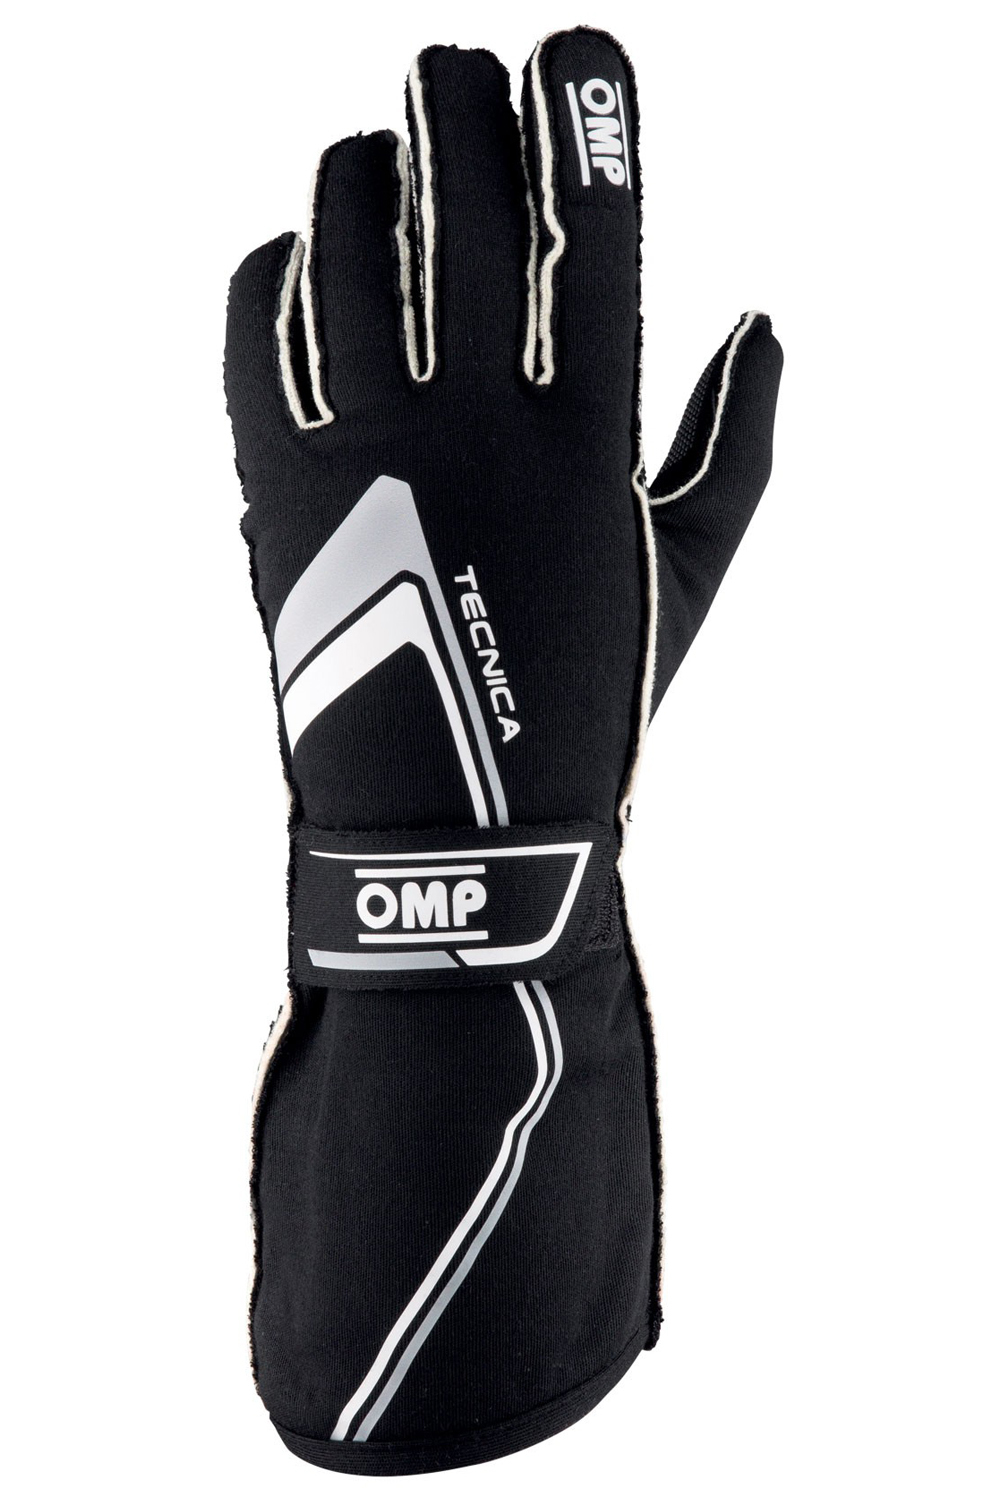 OMP Racing IB772NWS Driving Gloves, Tecnica, FIA Approved, Double Layer, Fire Retardant Fabric, White, Small, Pair